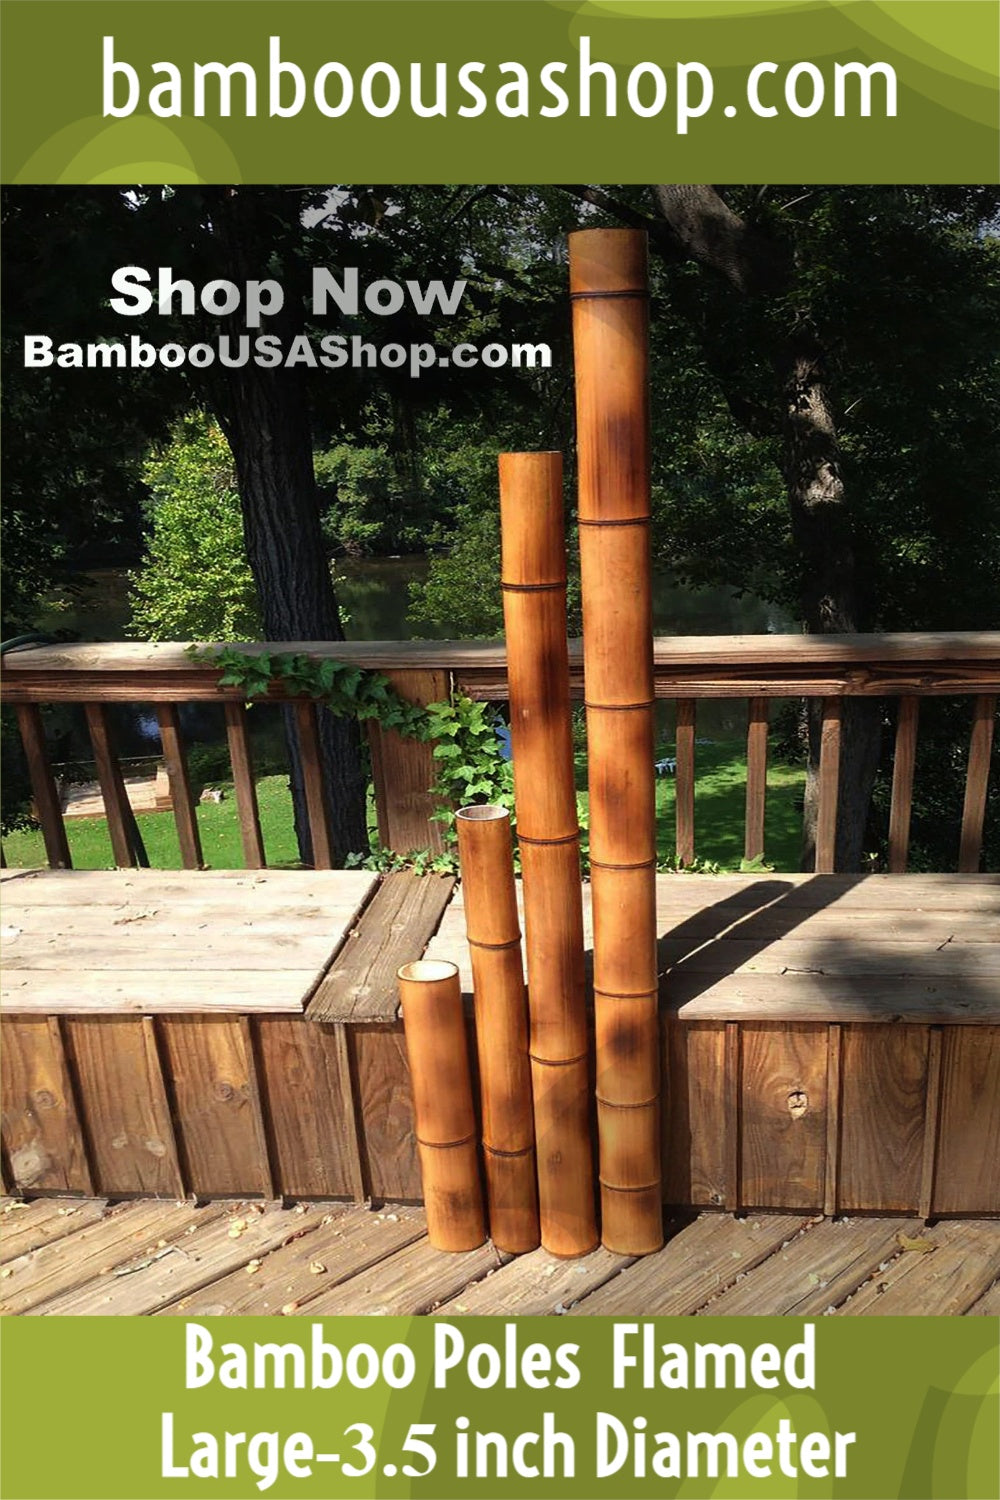 Bamboo Poles -Flamed Large-3.5